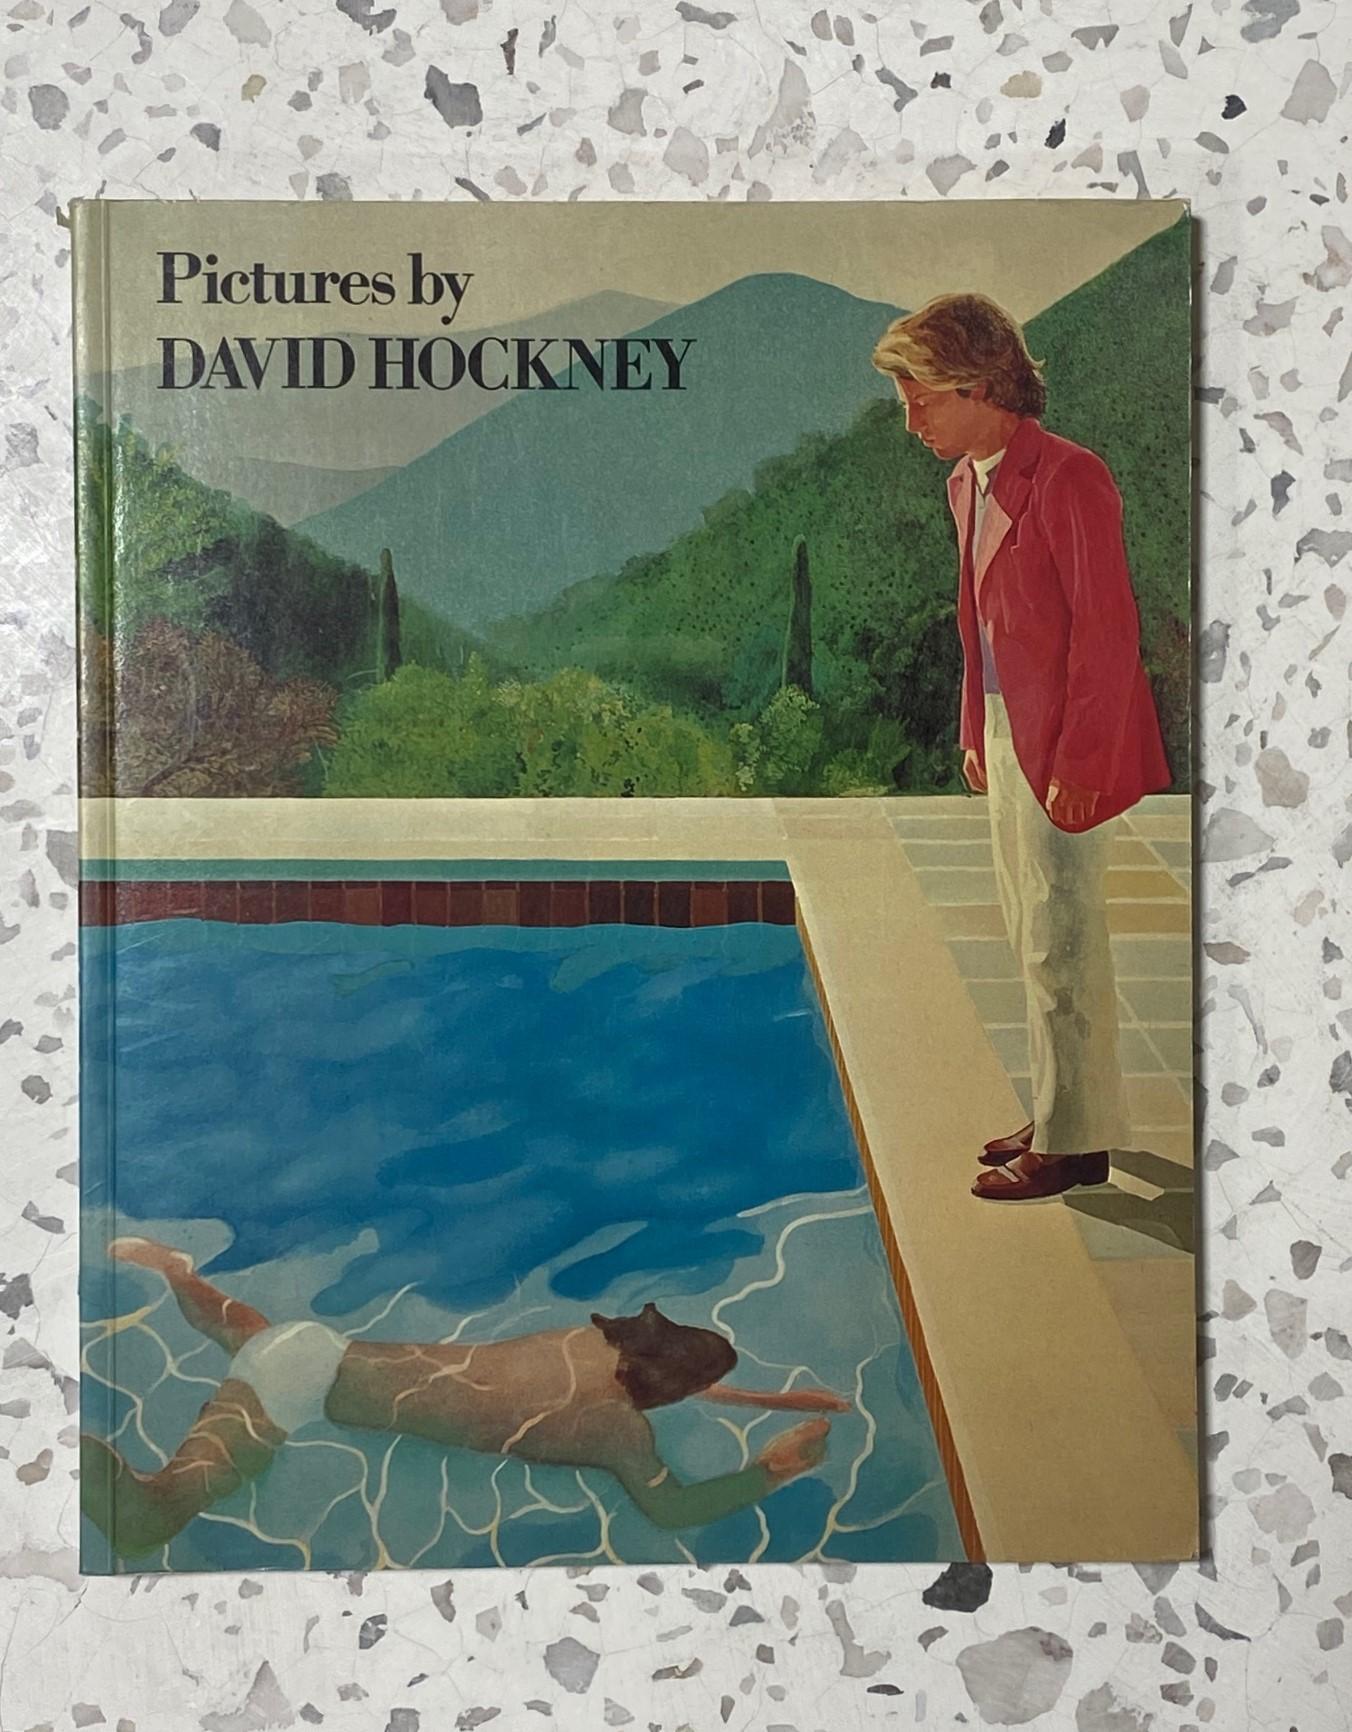 A David Hockney hand-signed first edition/ first printing (there was no hardcover book.  This copy is the true first edition) softcover art book 